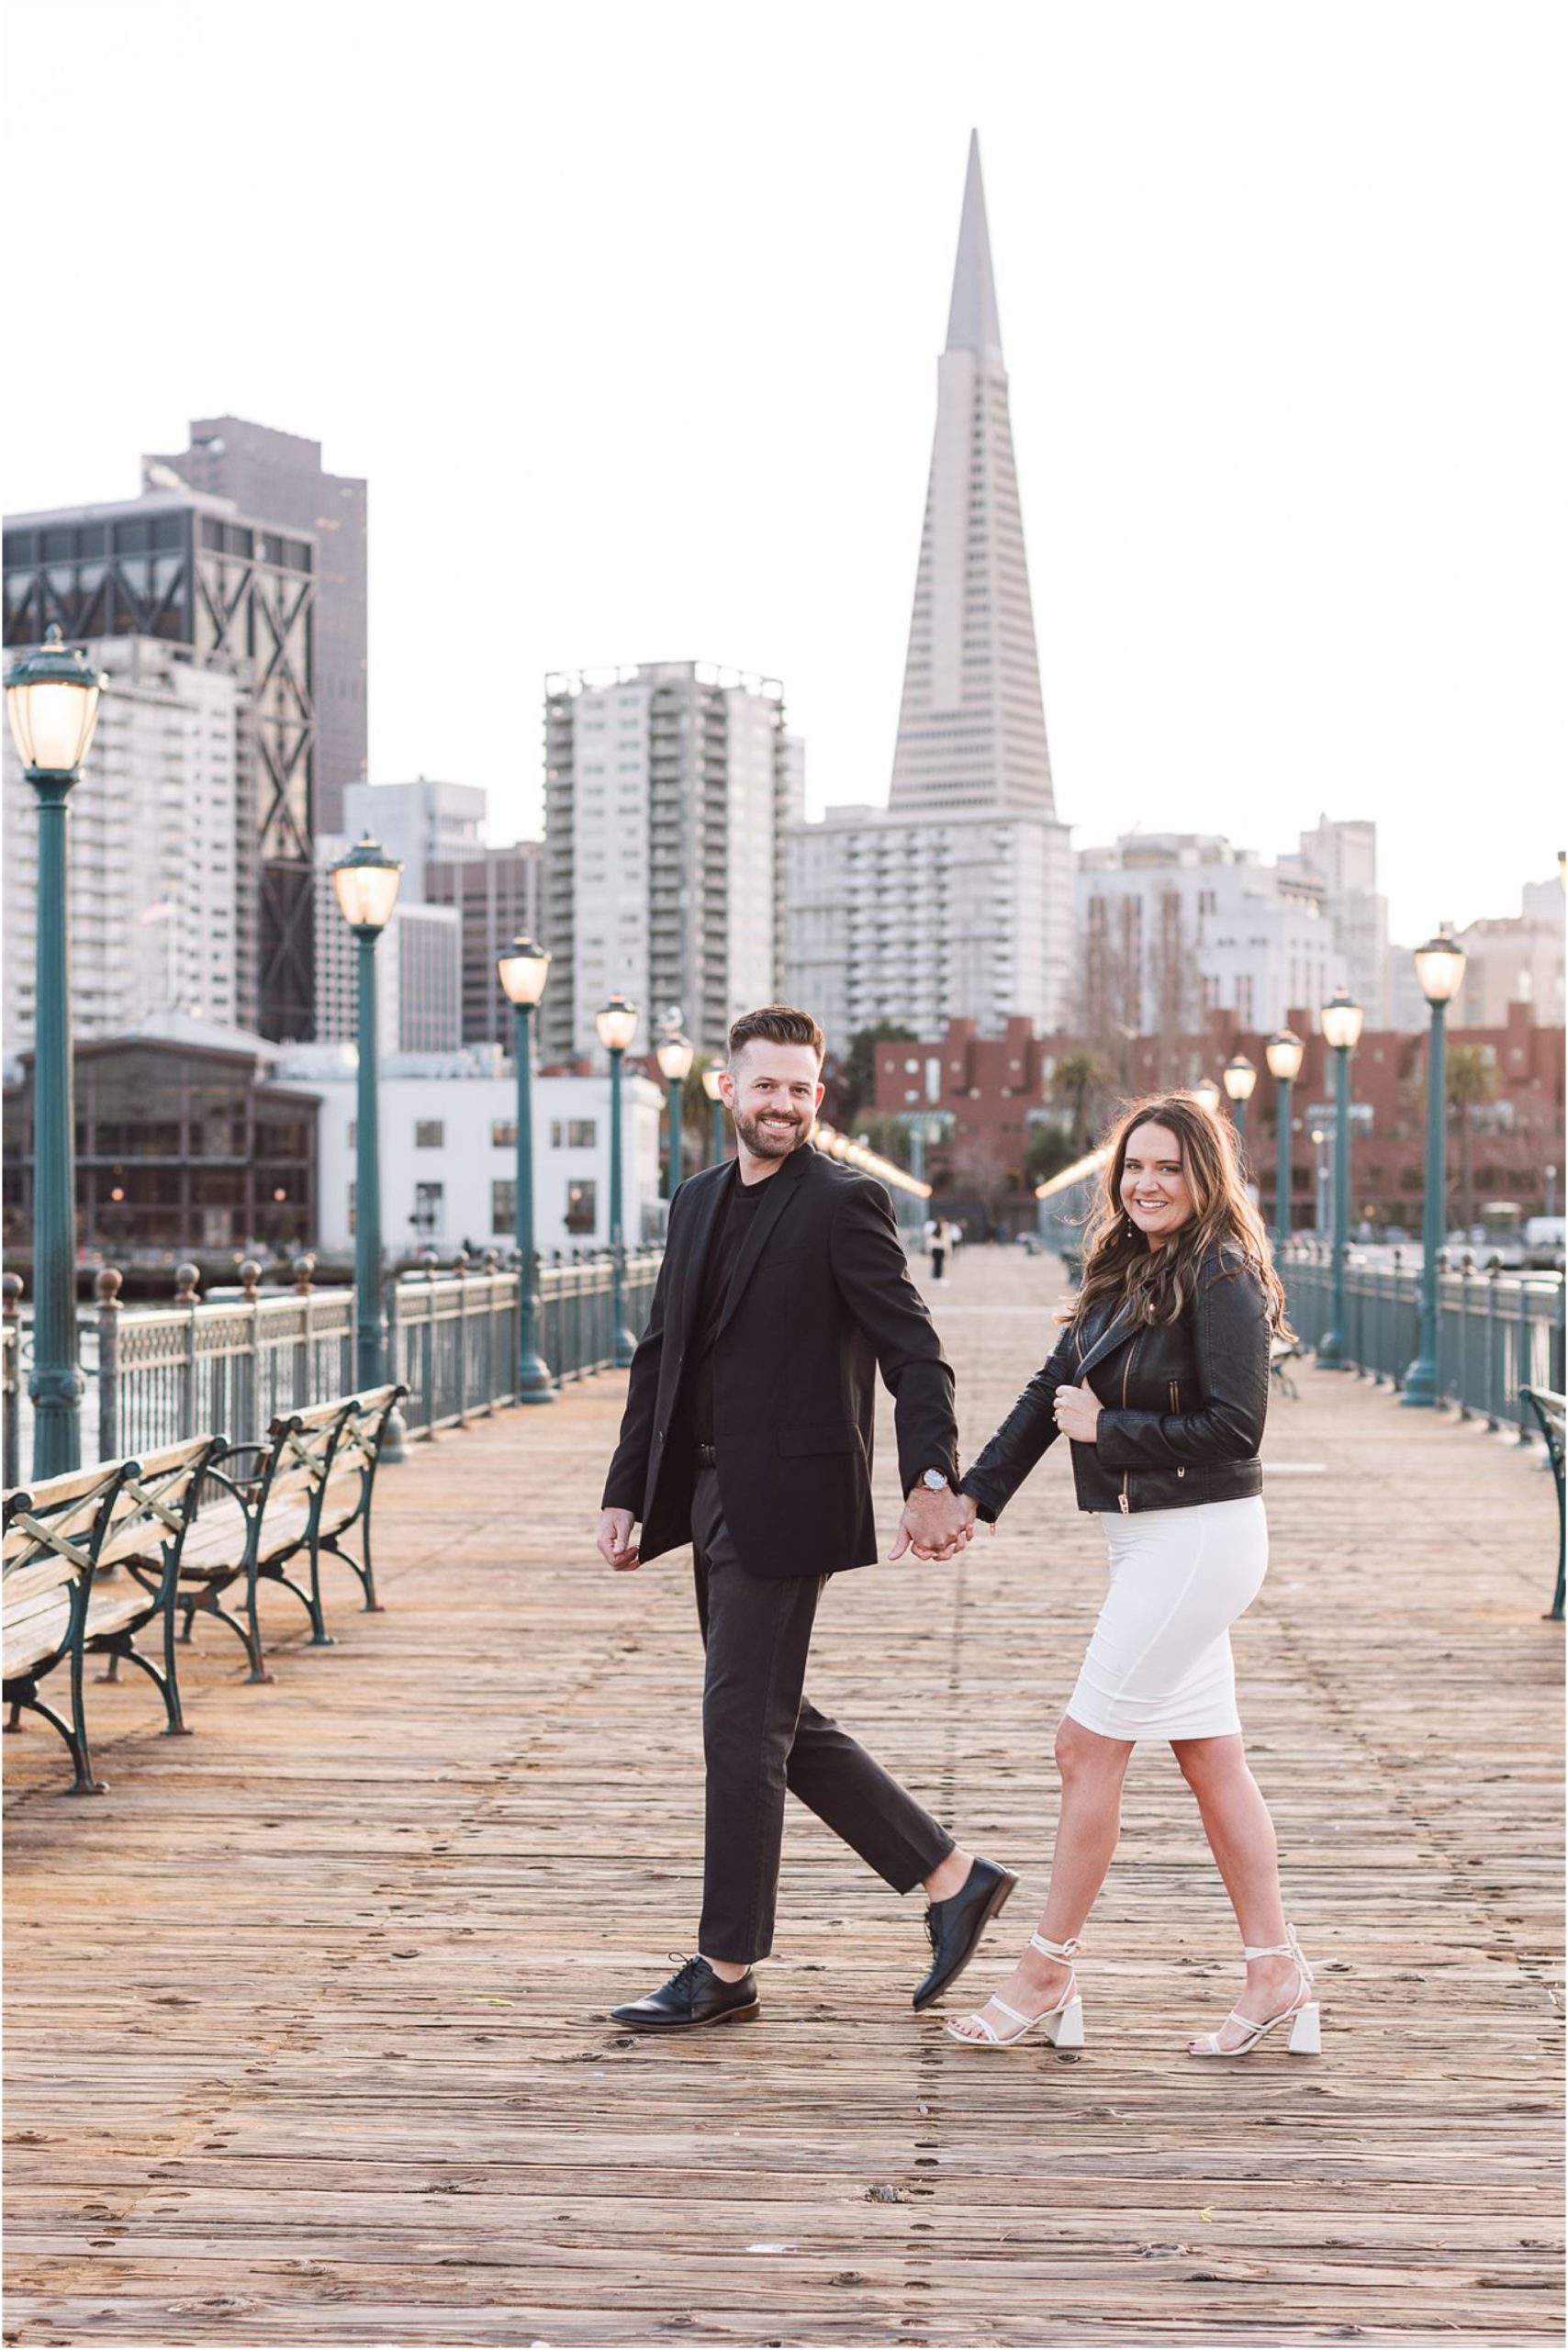 15 of the Best Places for Engagement Photos in San Francisco